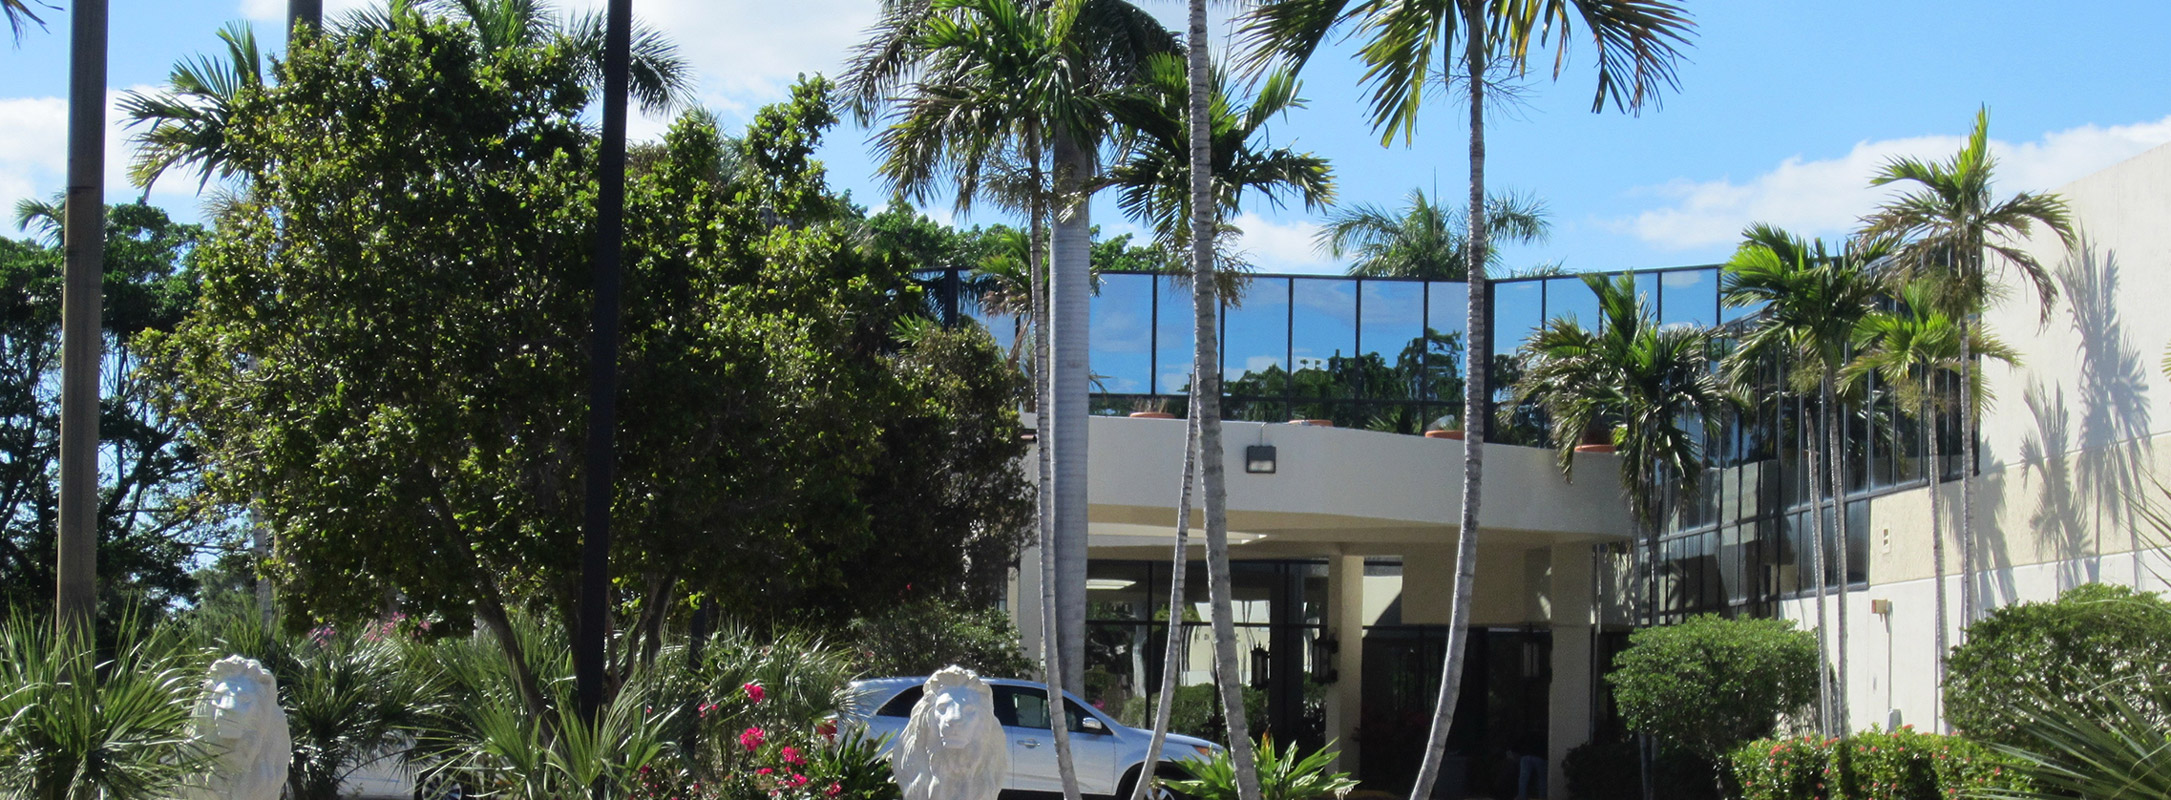 Don King Productions Corporate Headquarters, Deerfield Beach